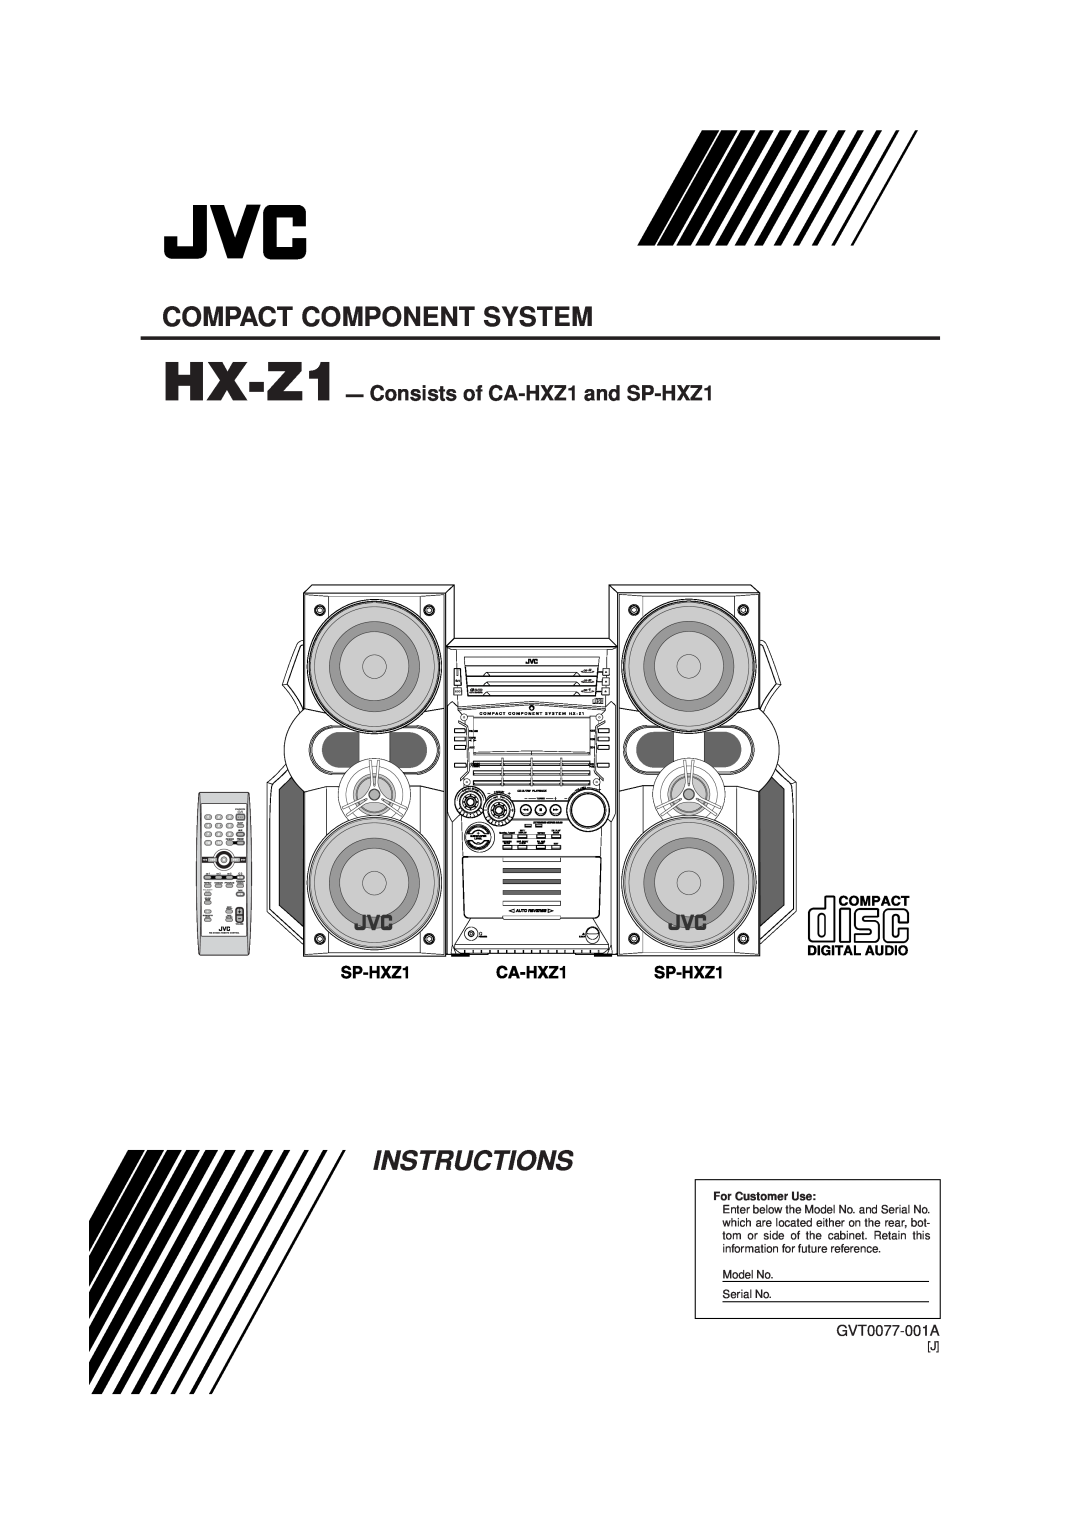 JVC manual Compact Component System, Instructions, HX-Z1- Consists of CA-HXZ1and SP-HXZ1, GVT0077-001A, Olume, Eset 